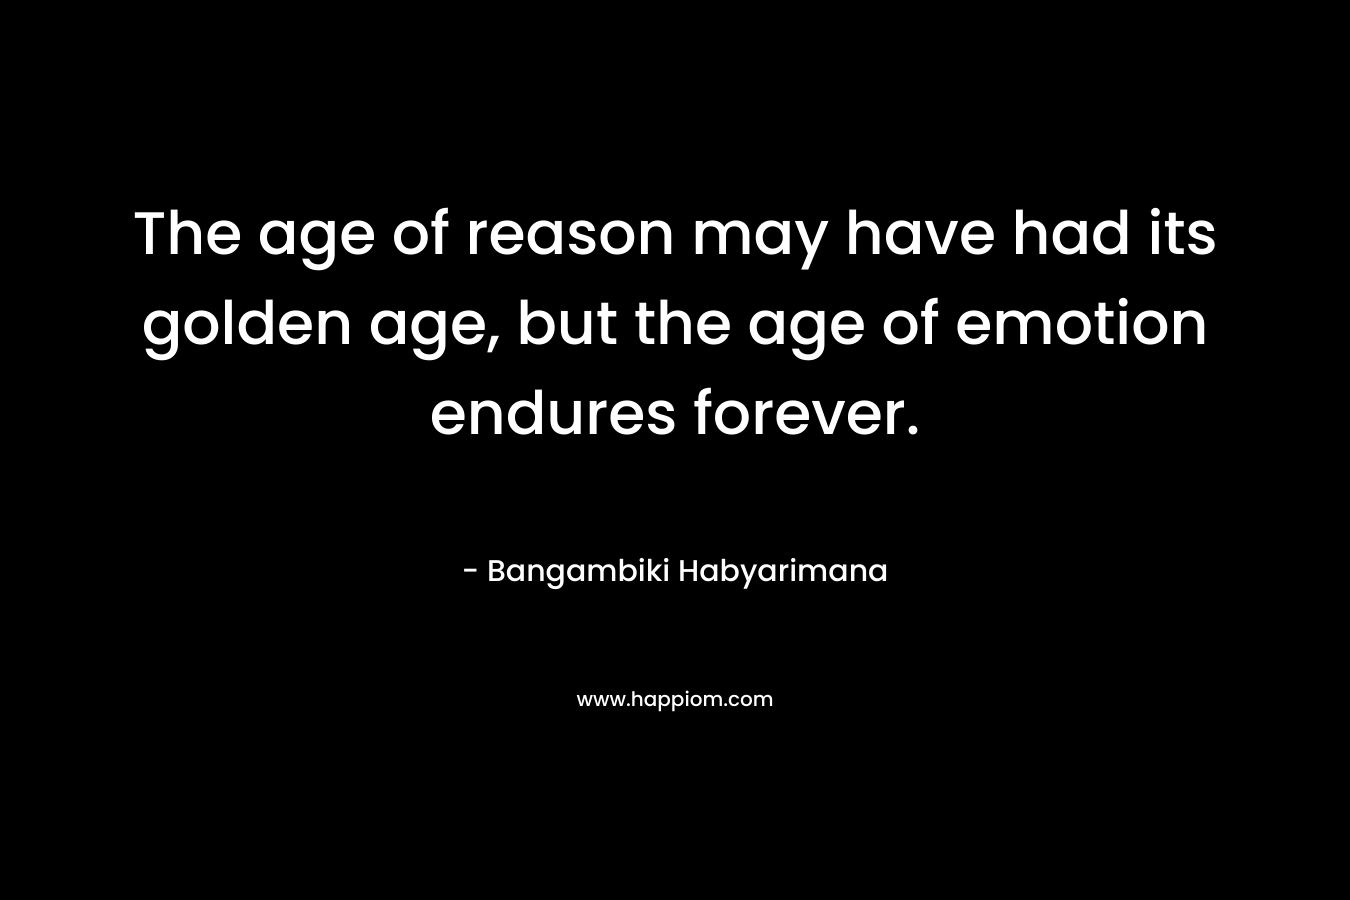 The age of reason may have had its golden age, but the age of emotion endures forever.